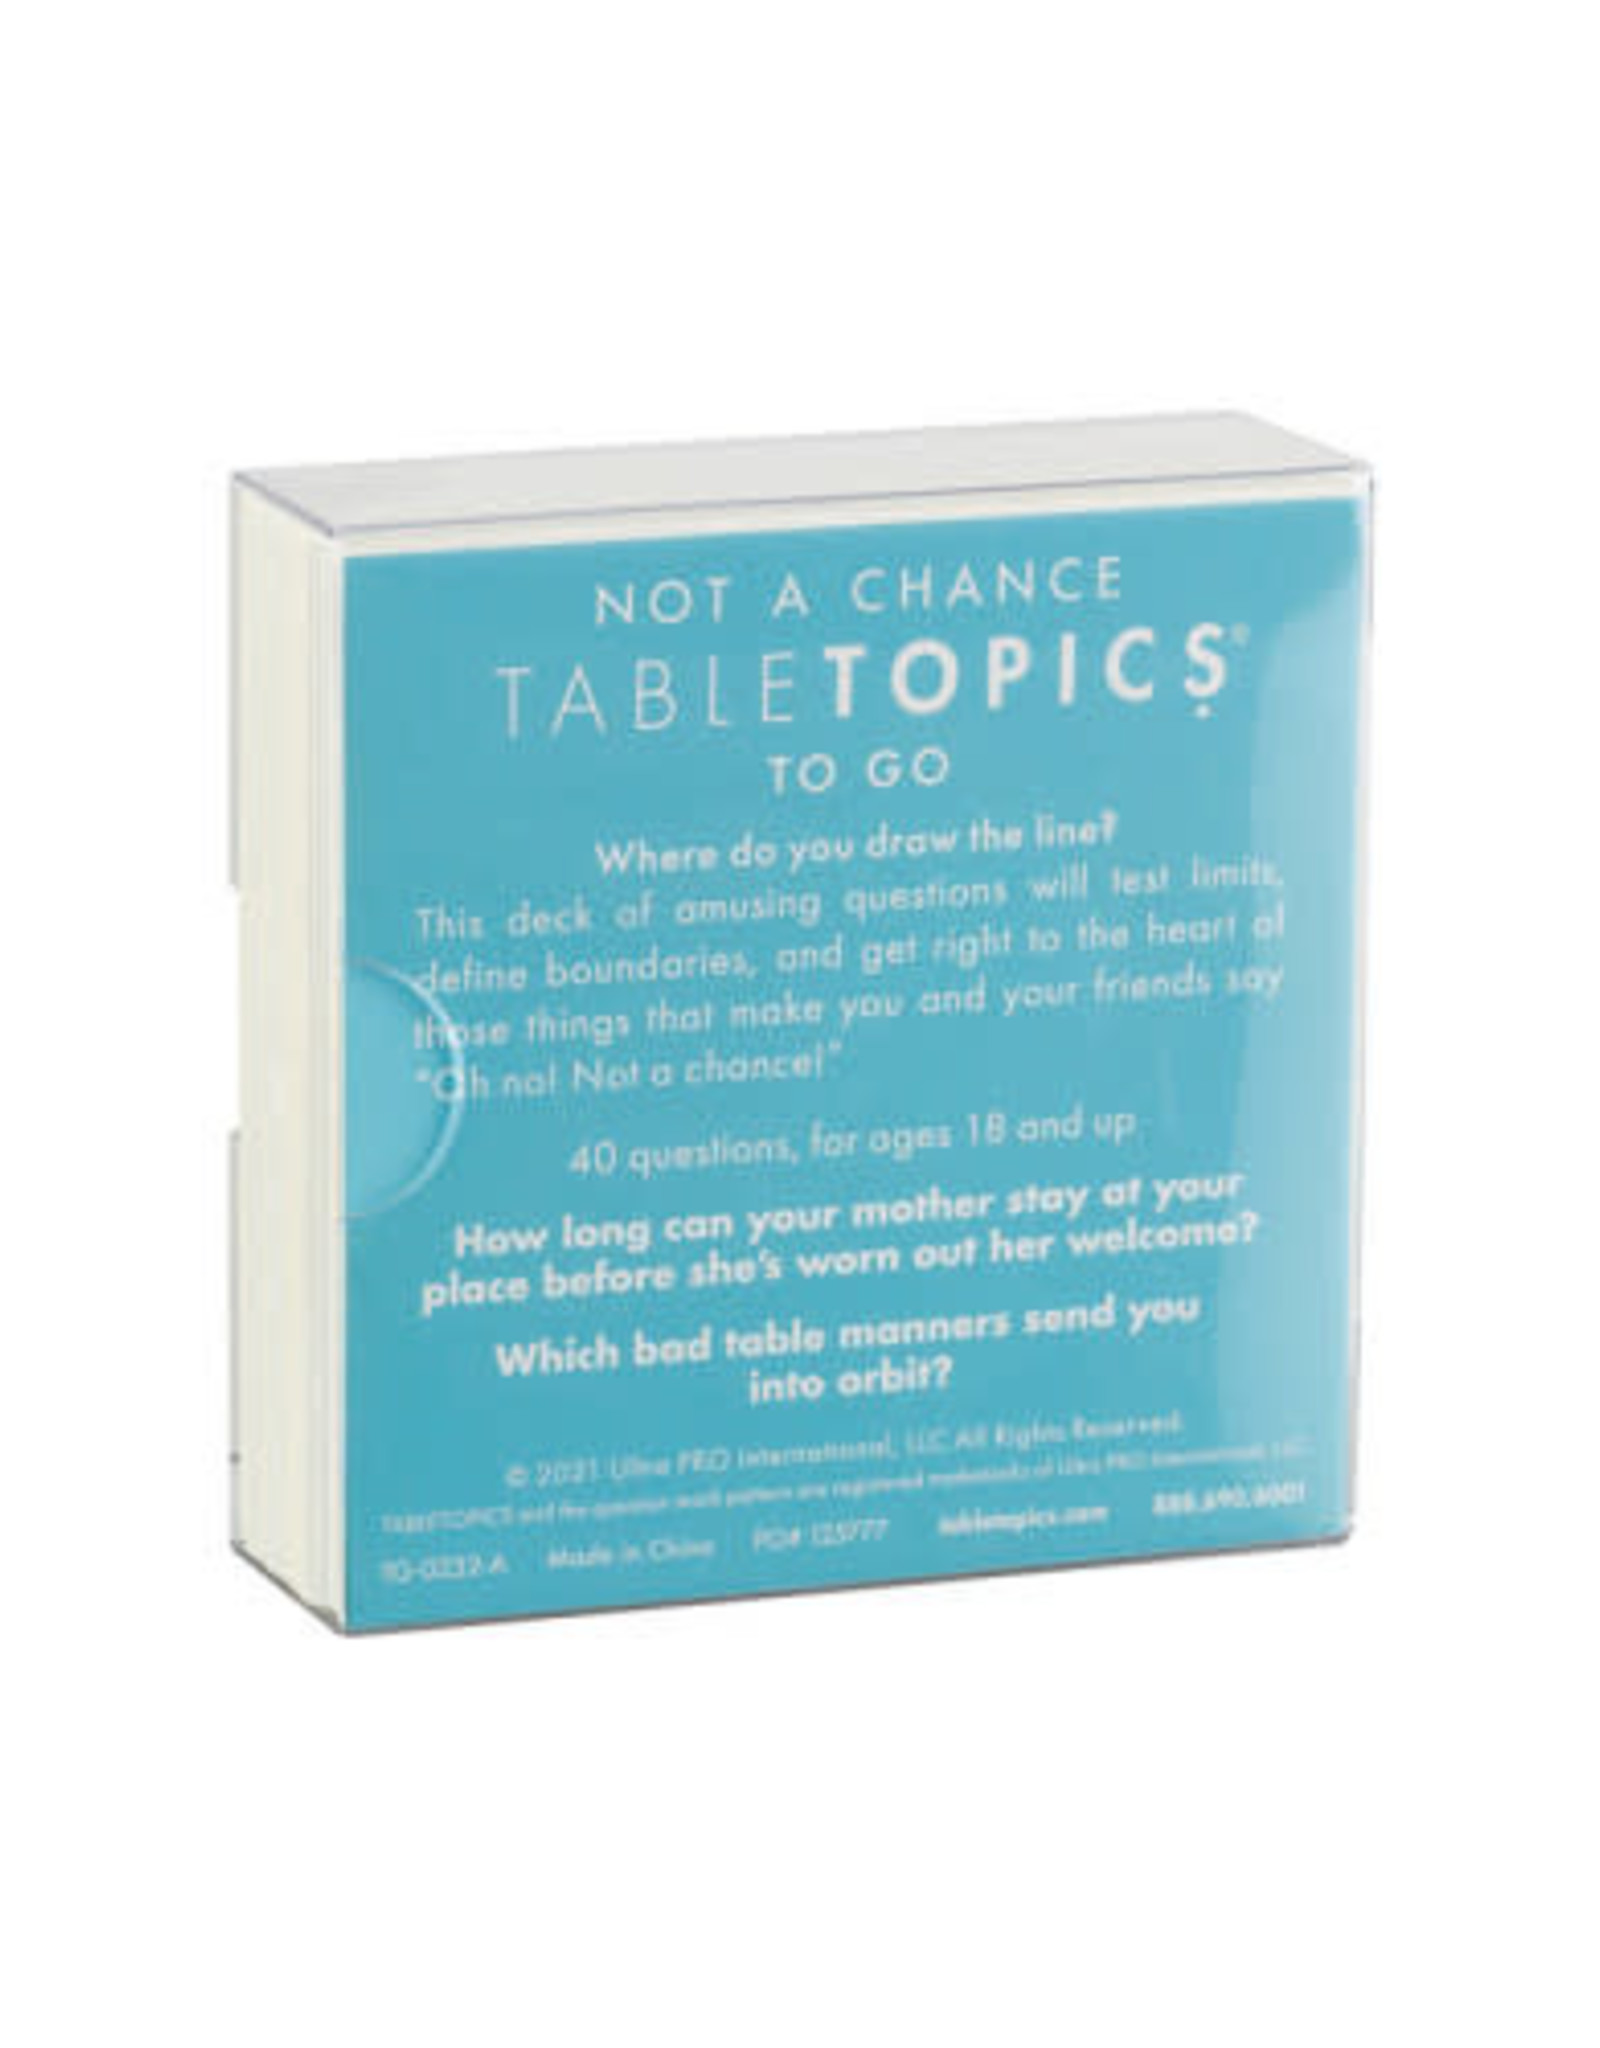 Tabletopics NOT A CHANCE TO GO TABLETOPICS